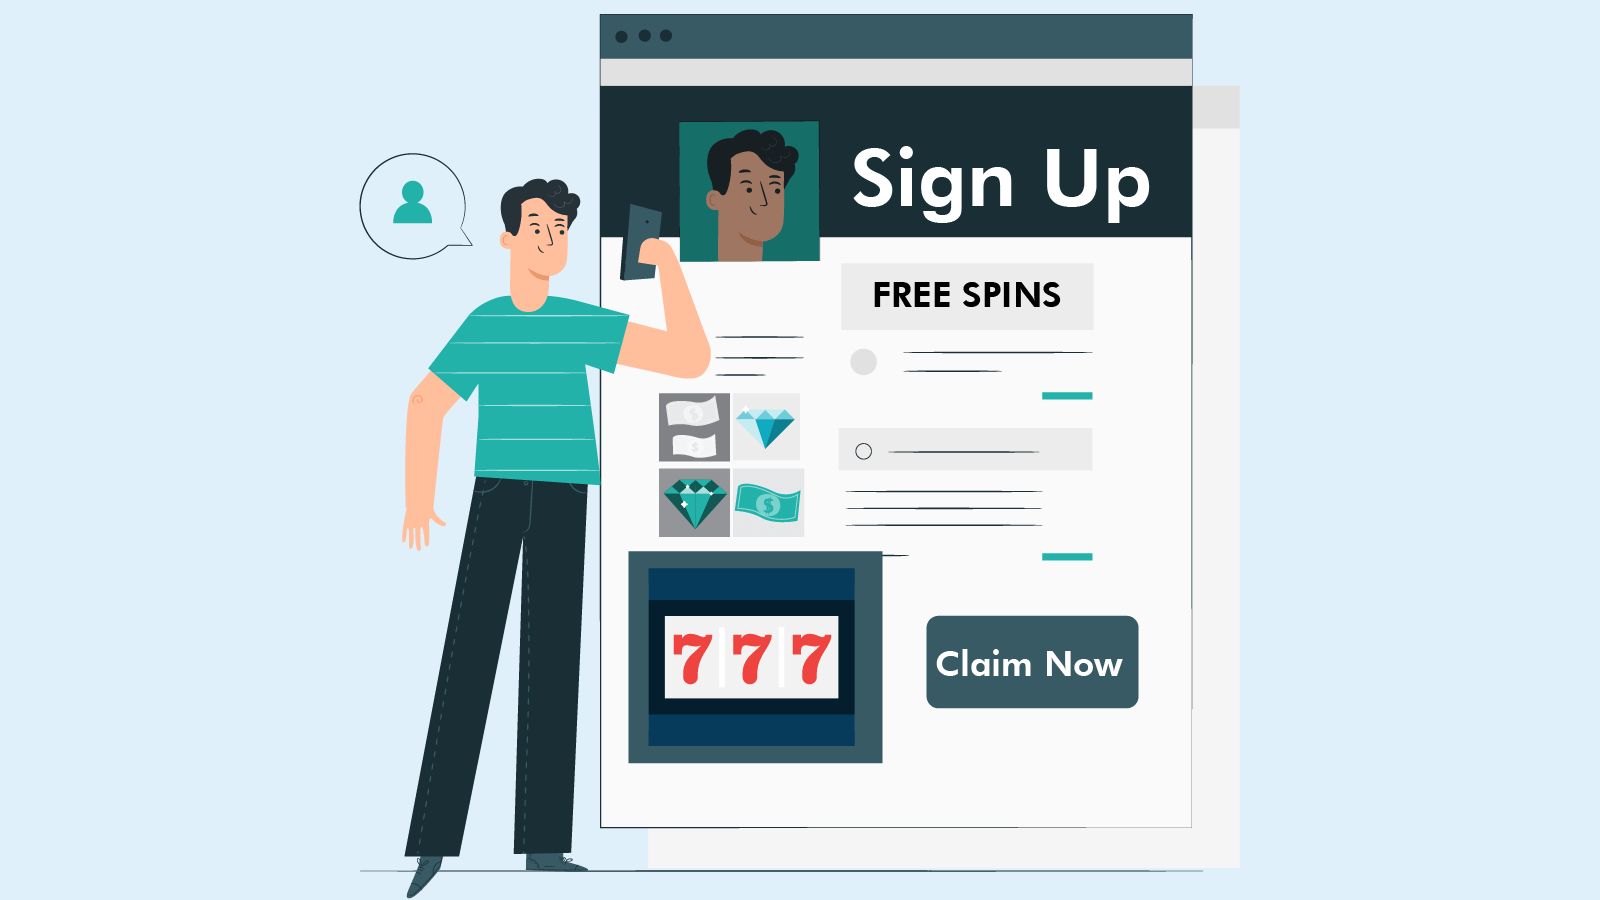 How to claim free spins on sign up